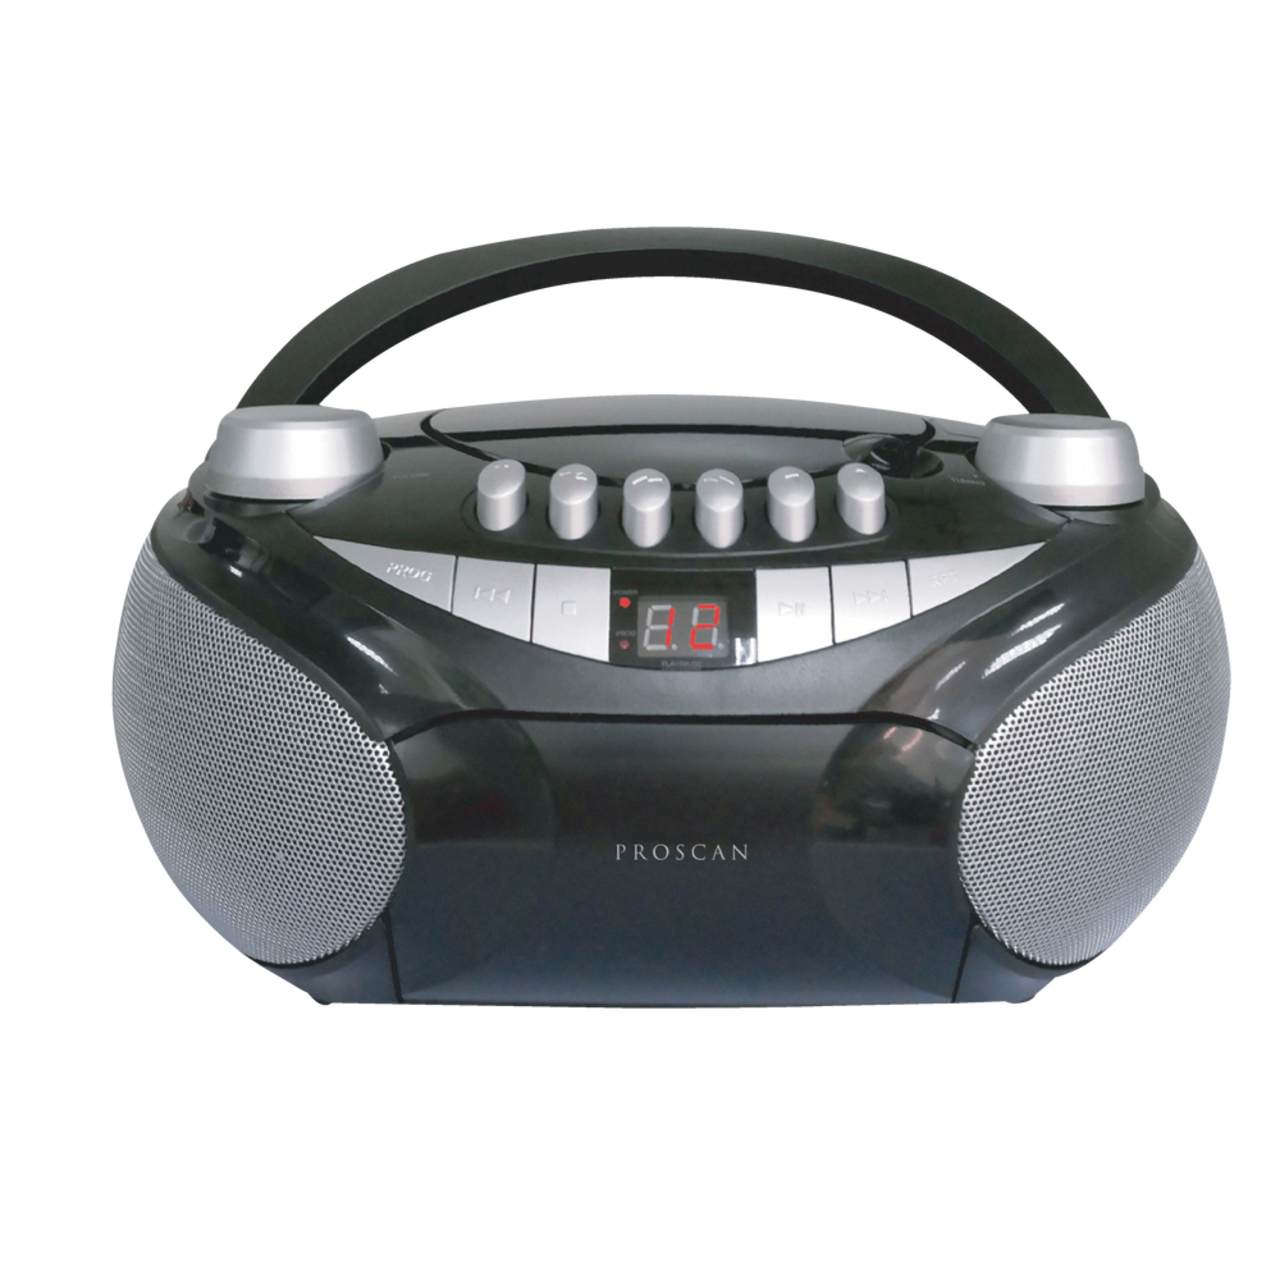 https://media-www.canadiantire.ca/product/living/electronics/home-entertainment-systems/0440272/proscan-portable-cd-boom-box-with-cassette-player-72474372-d762-4fc5-a290-9efbd868a9b0.png?imdensity=1&imwidth=640&impolicy=mZoom